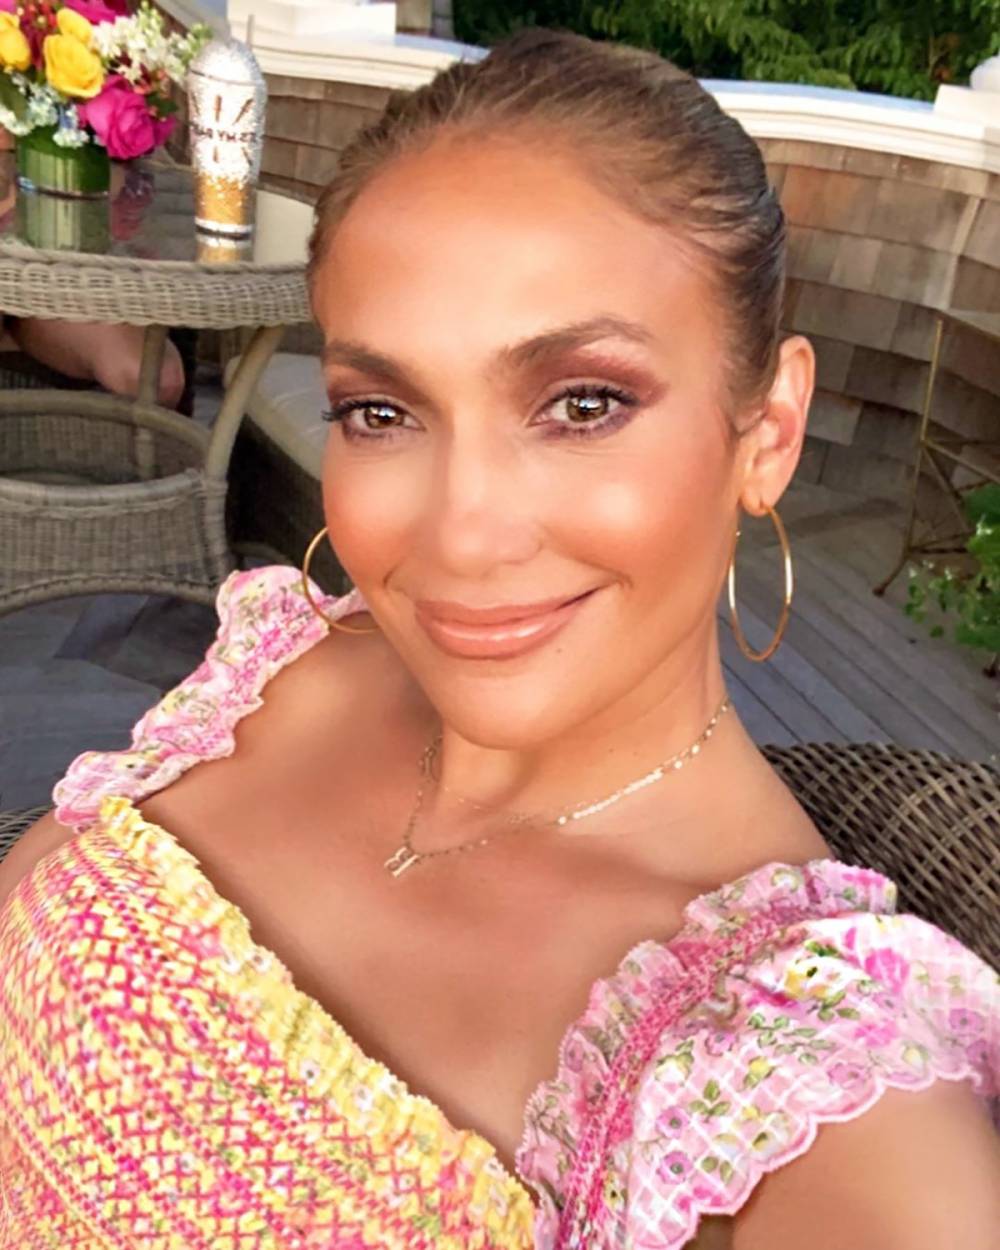 J.Lo Is Launching a Beauty Line! Here’s Everything We Know So Far